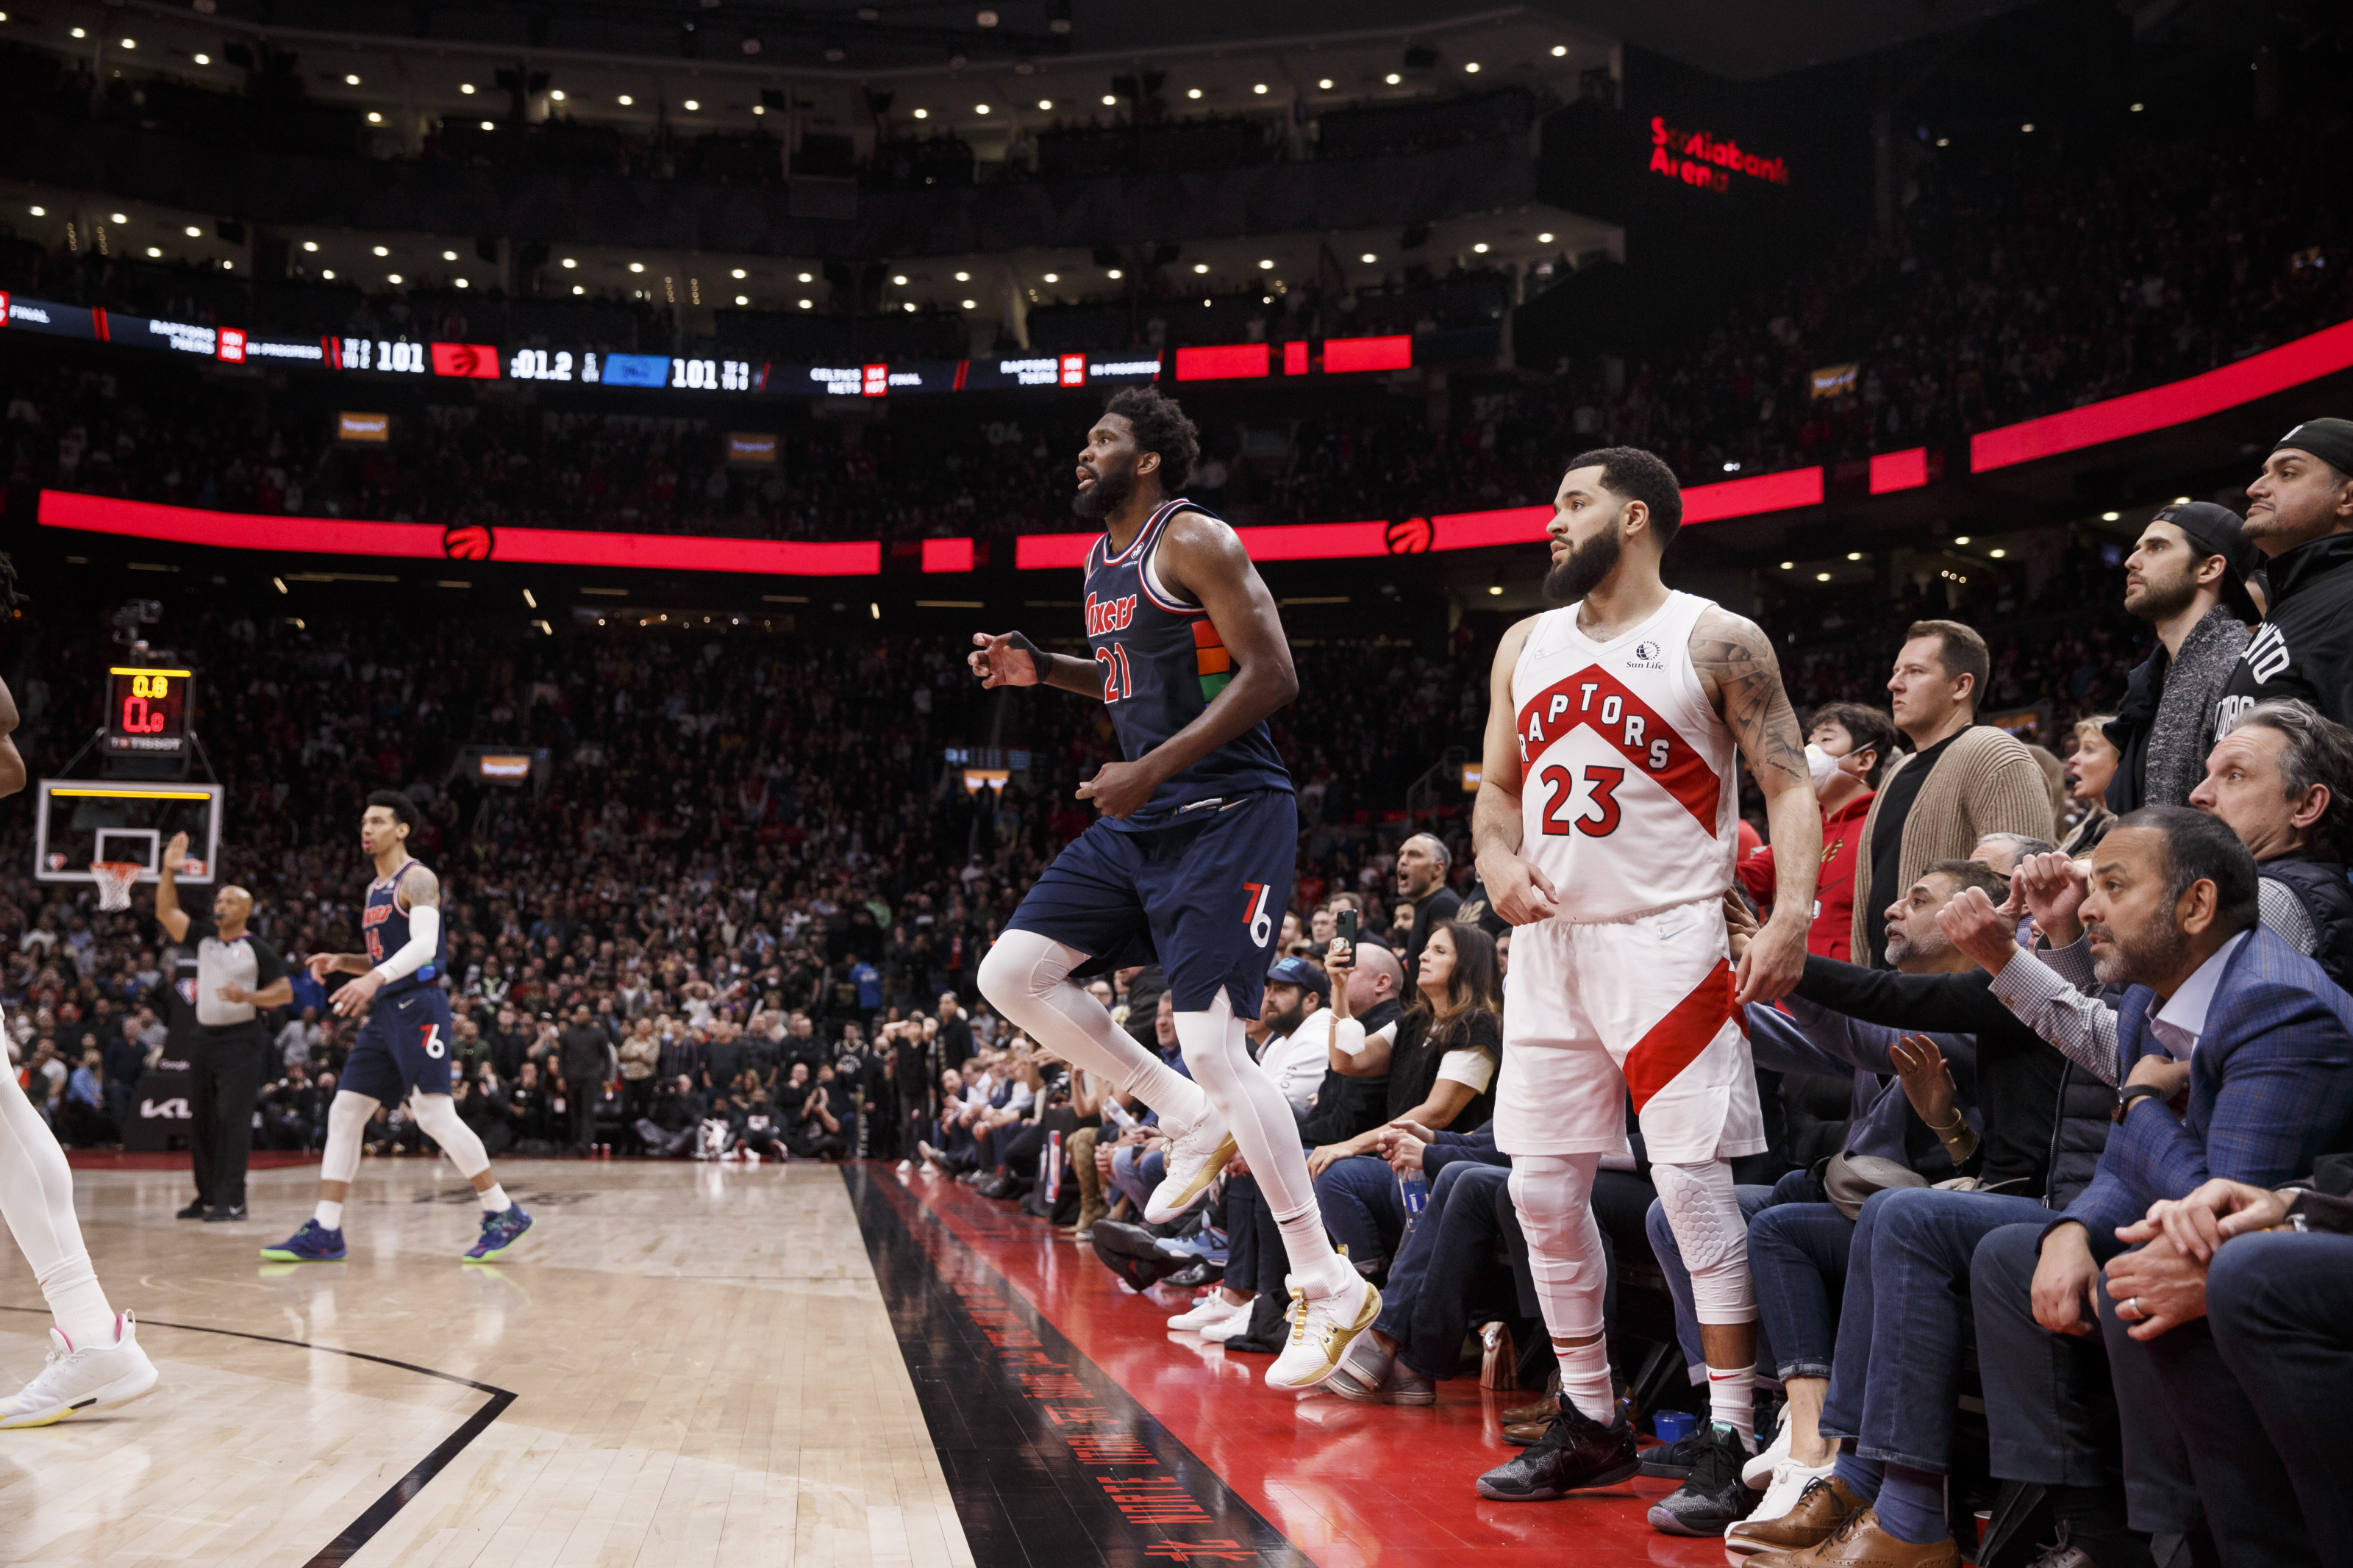 Raptors Game Today Raptors vs 76ers Odds, Starting Lineup, Injury Report, Predictions, TV Channel for NBA Playoffs Game 4